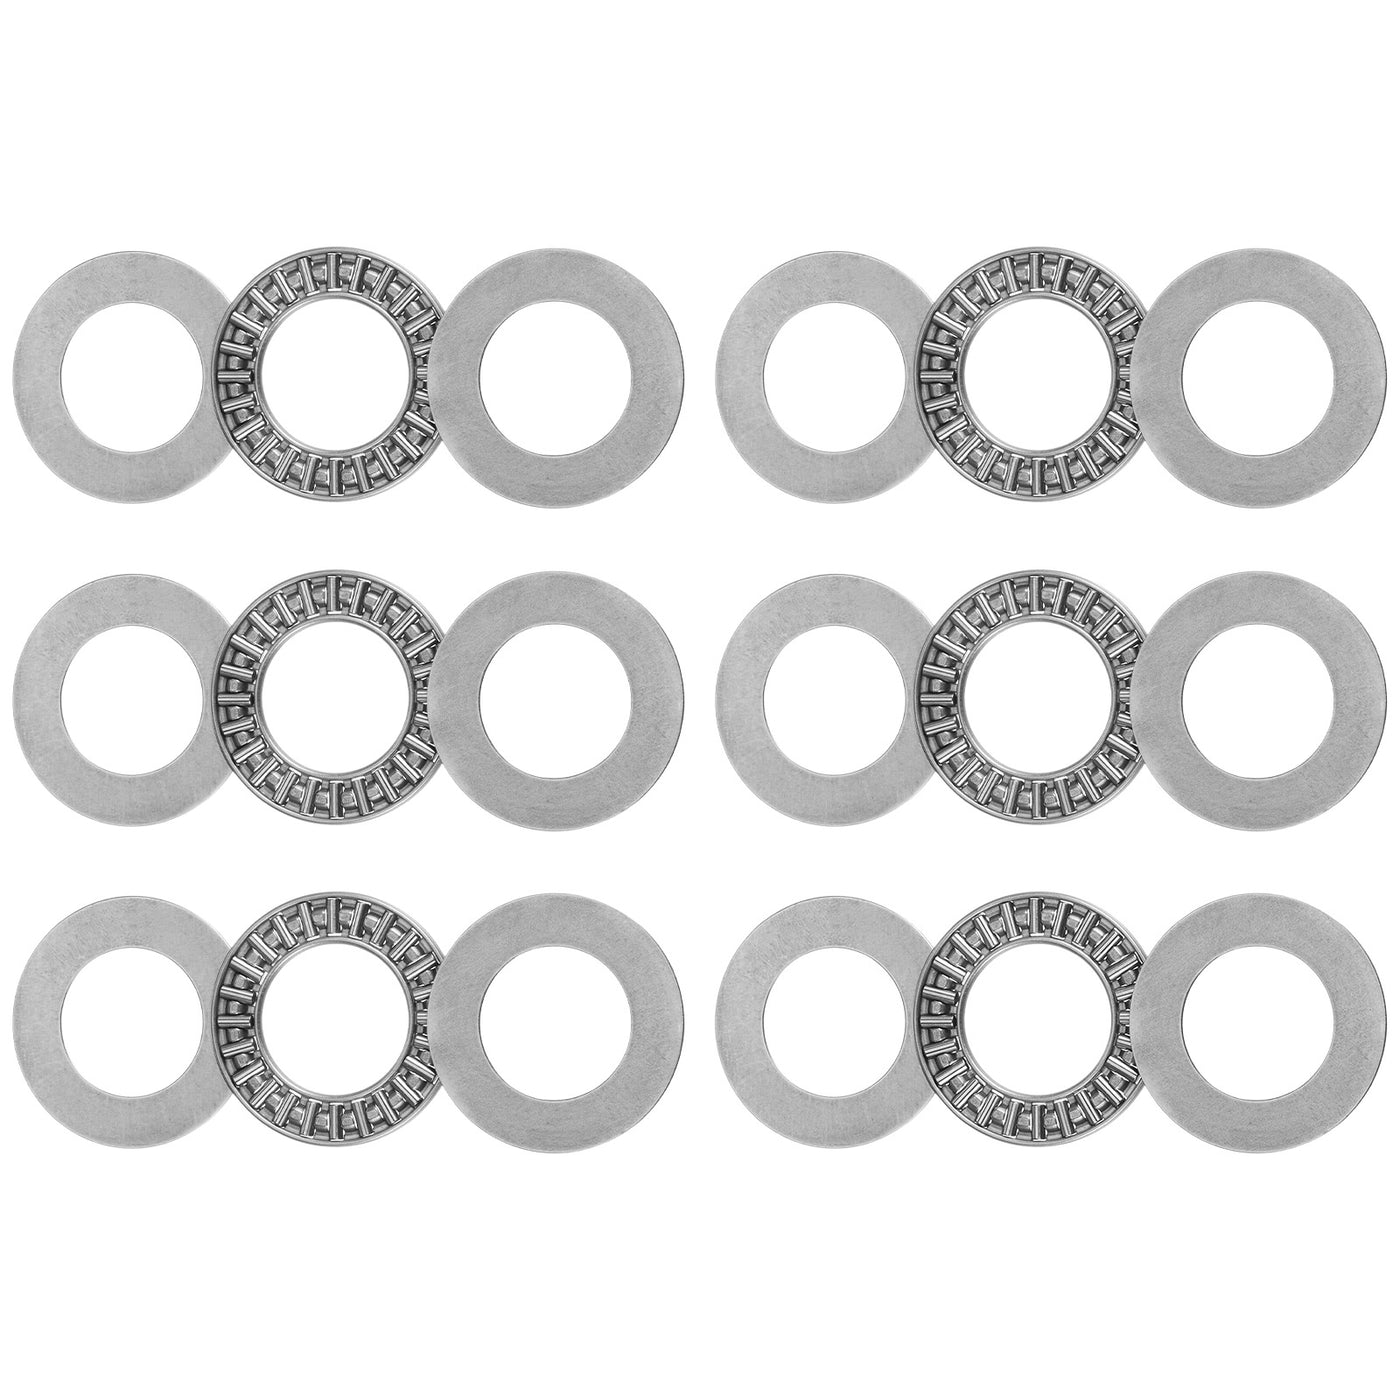 uxcell Uxcell AXK2035 Thrust Needle Roller Bearings 20x35x2mm with AS2035 Washers 6pcs